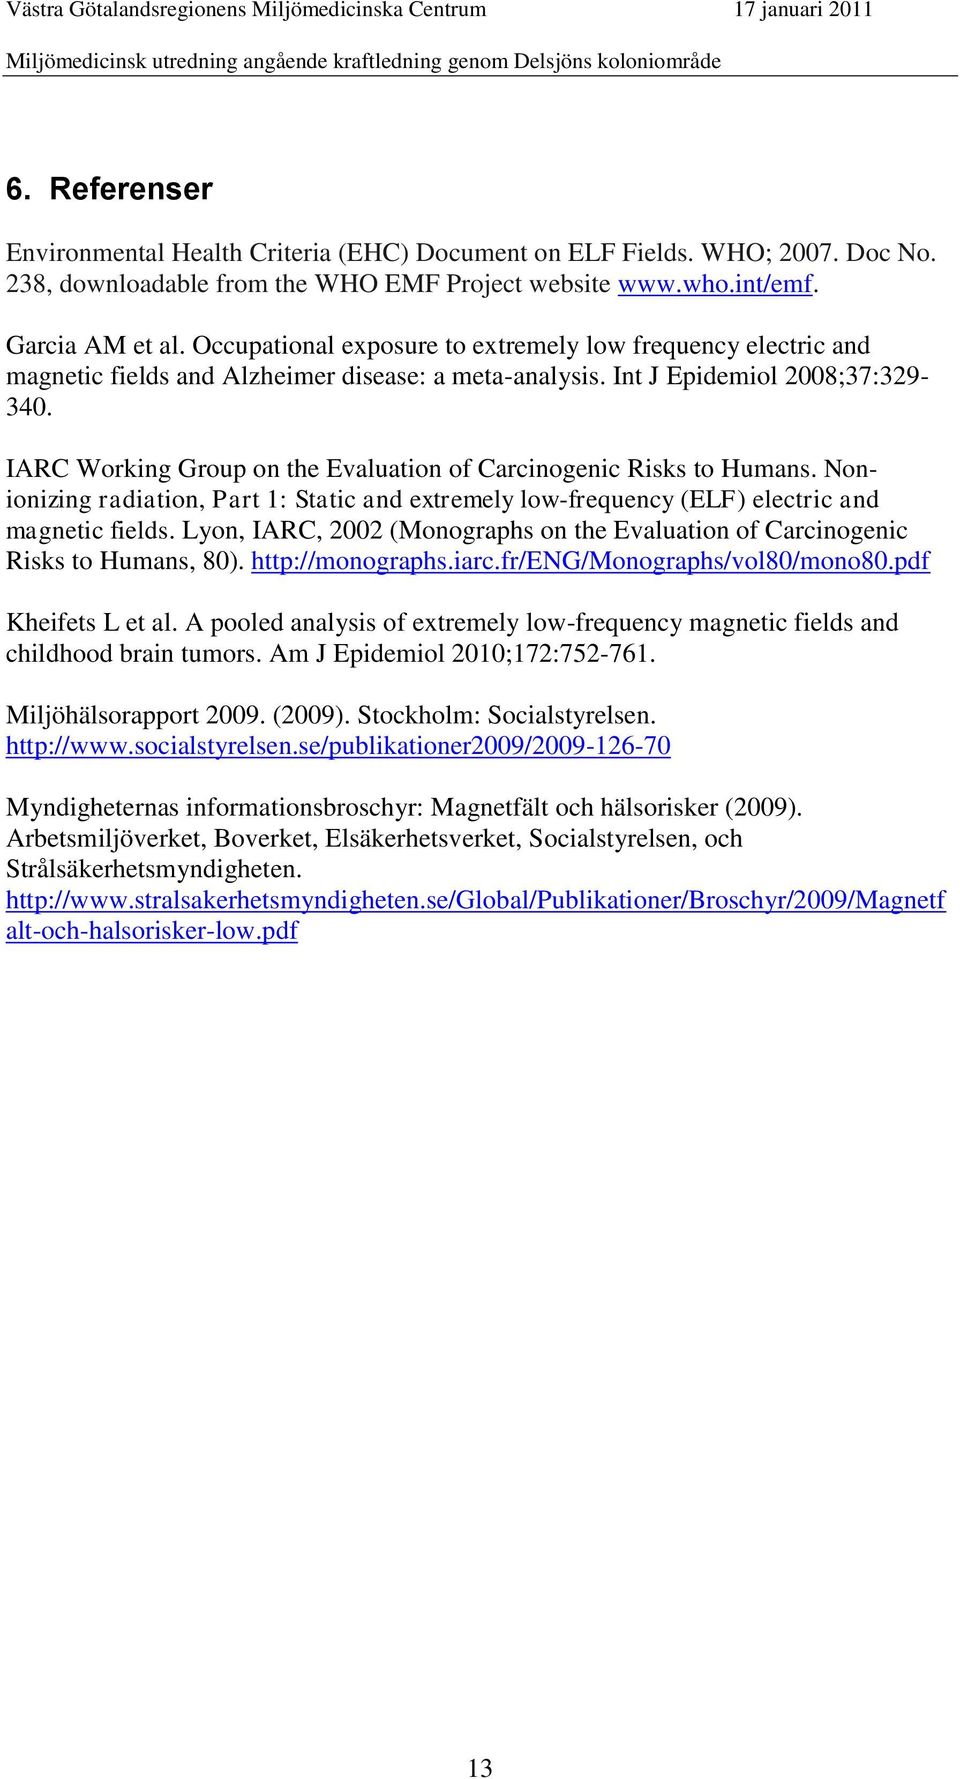 IARC Working Group on the Evaluation of Carcinogenic Risks to Humans. Nonionizing radiation, Part 1: Static and extremely low-frequency (ELF) electric and magnetic fields.